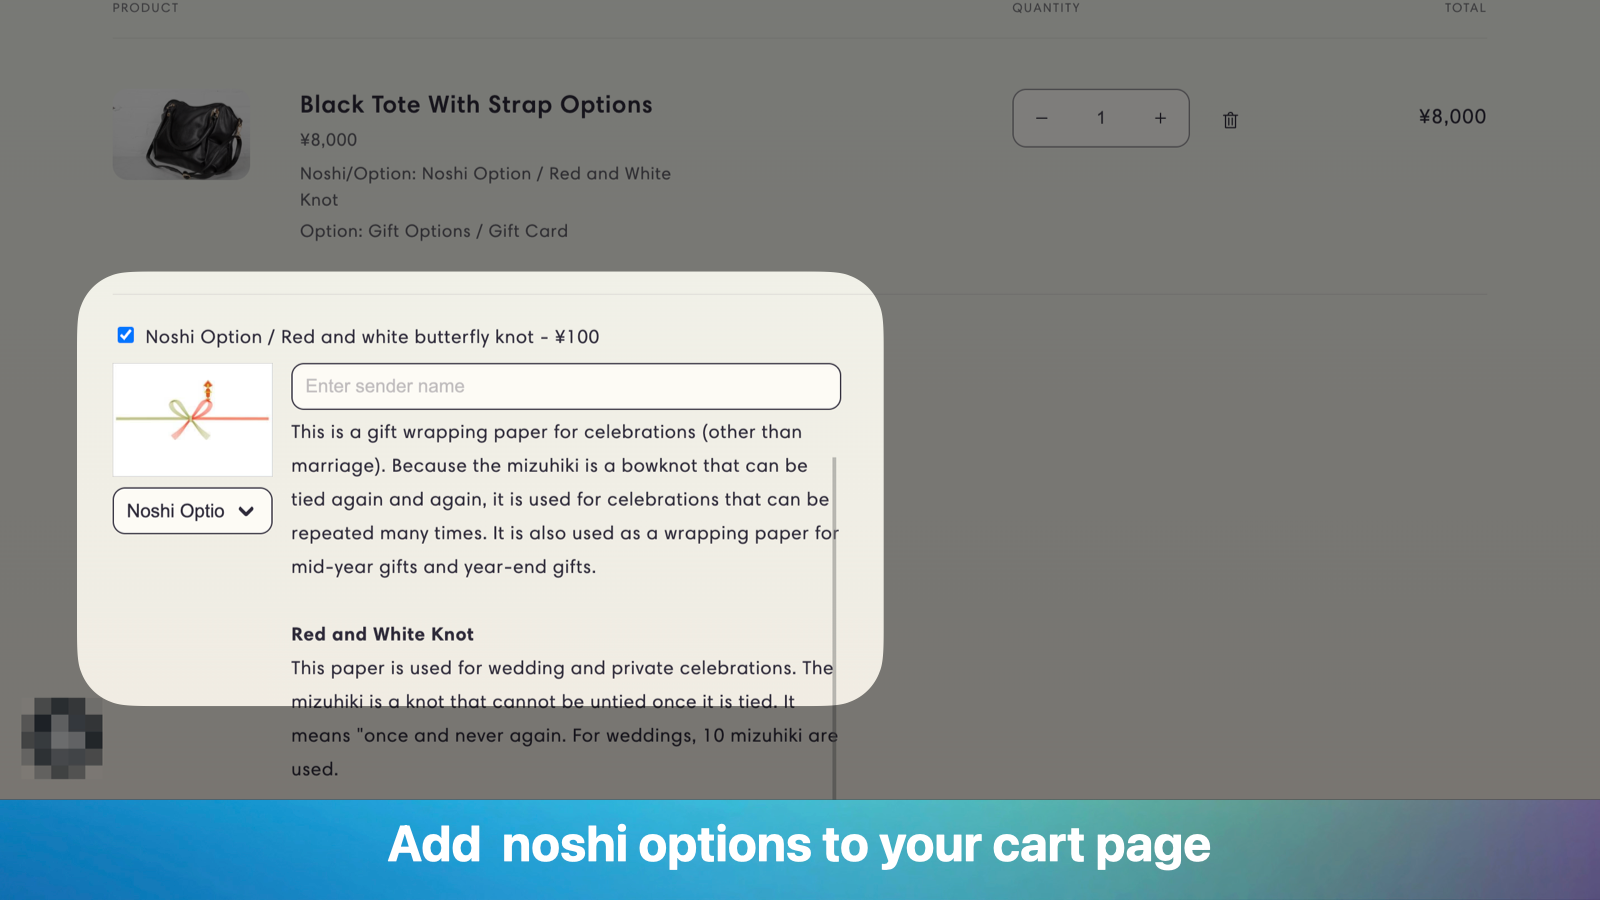 Add noshi options to your cart page